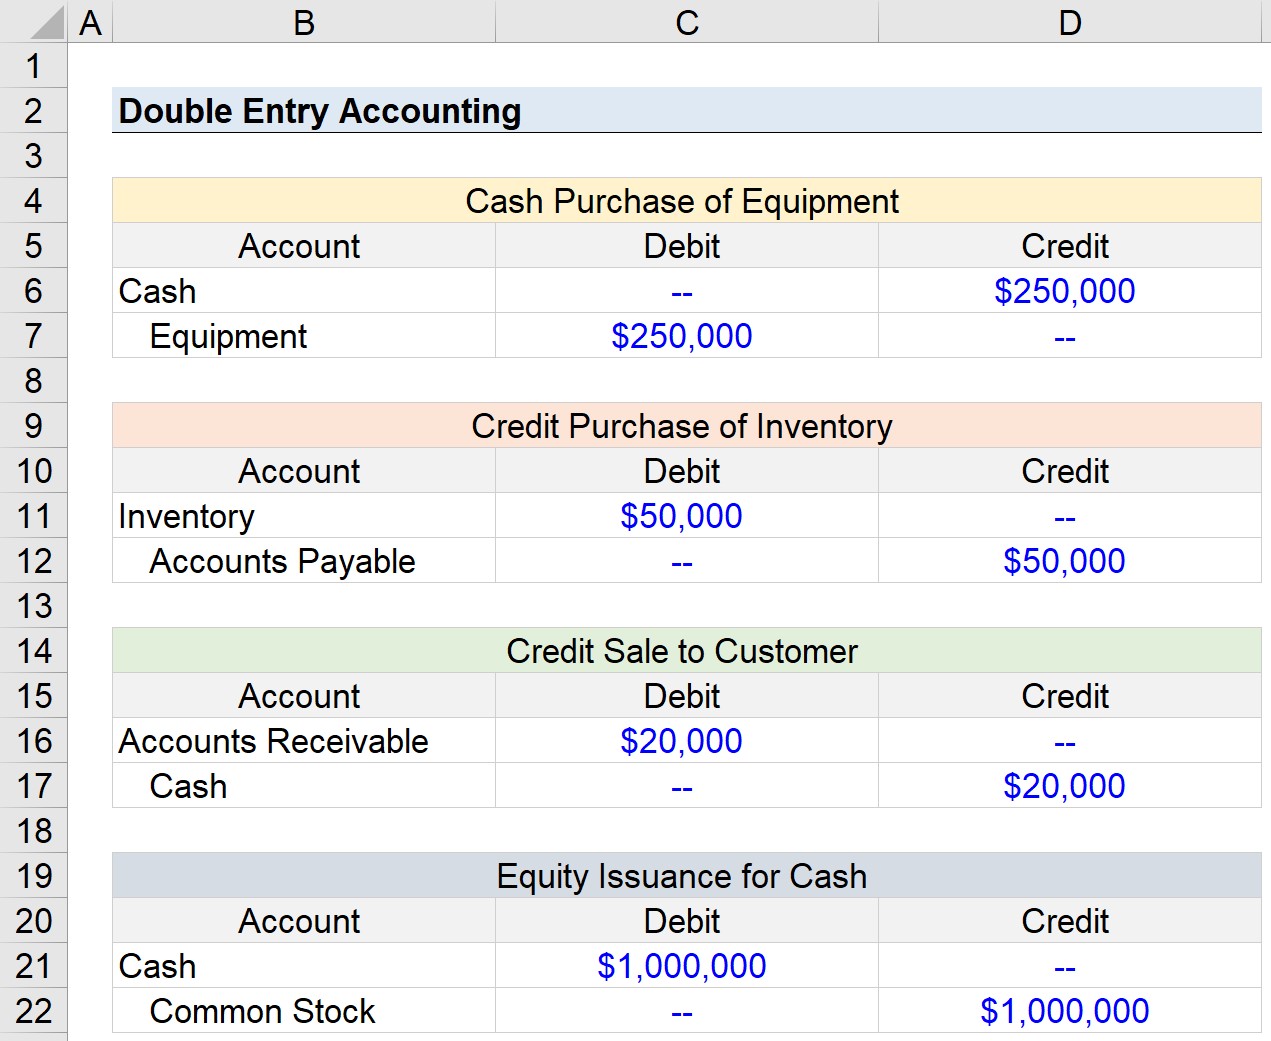 An accounting system captures relevant data about transactions